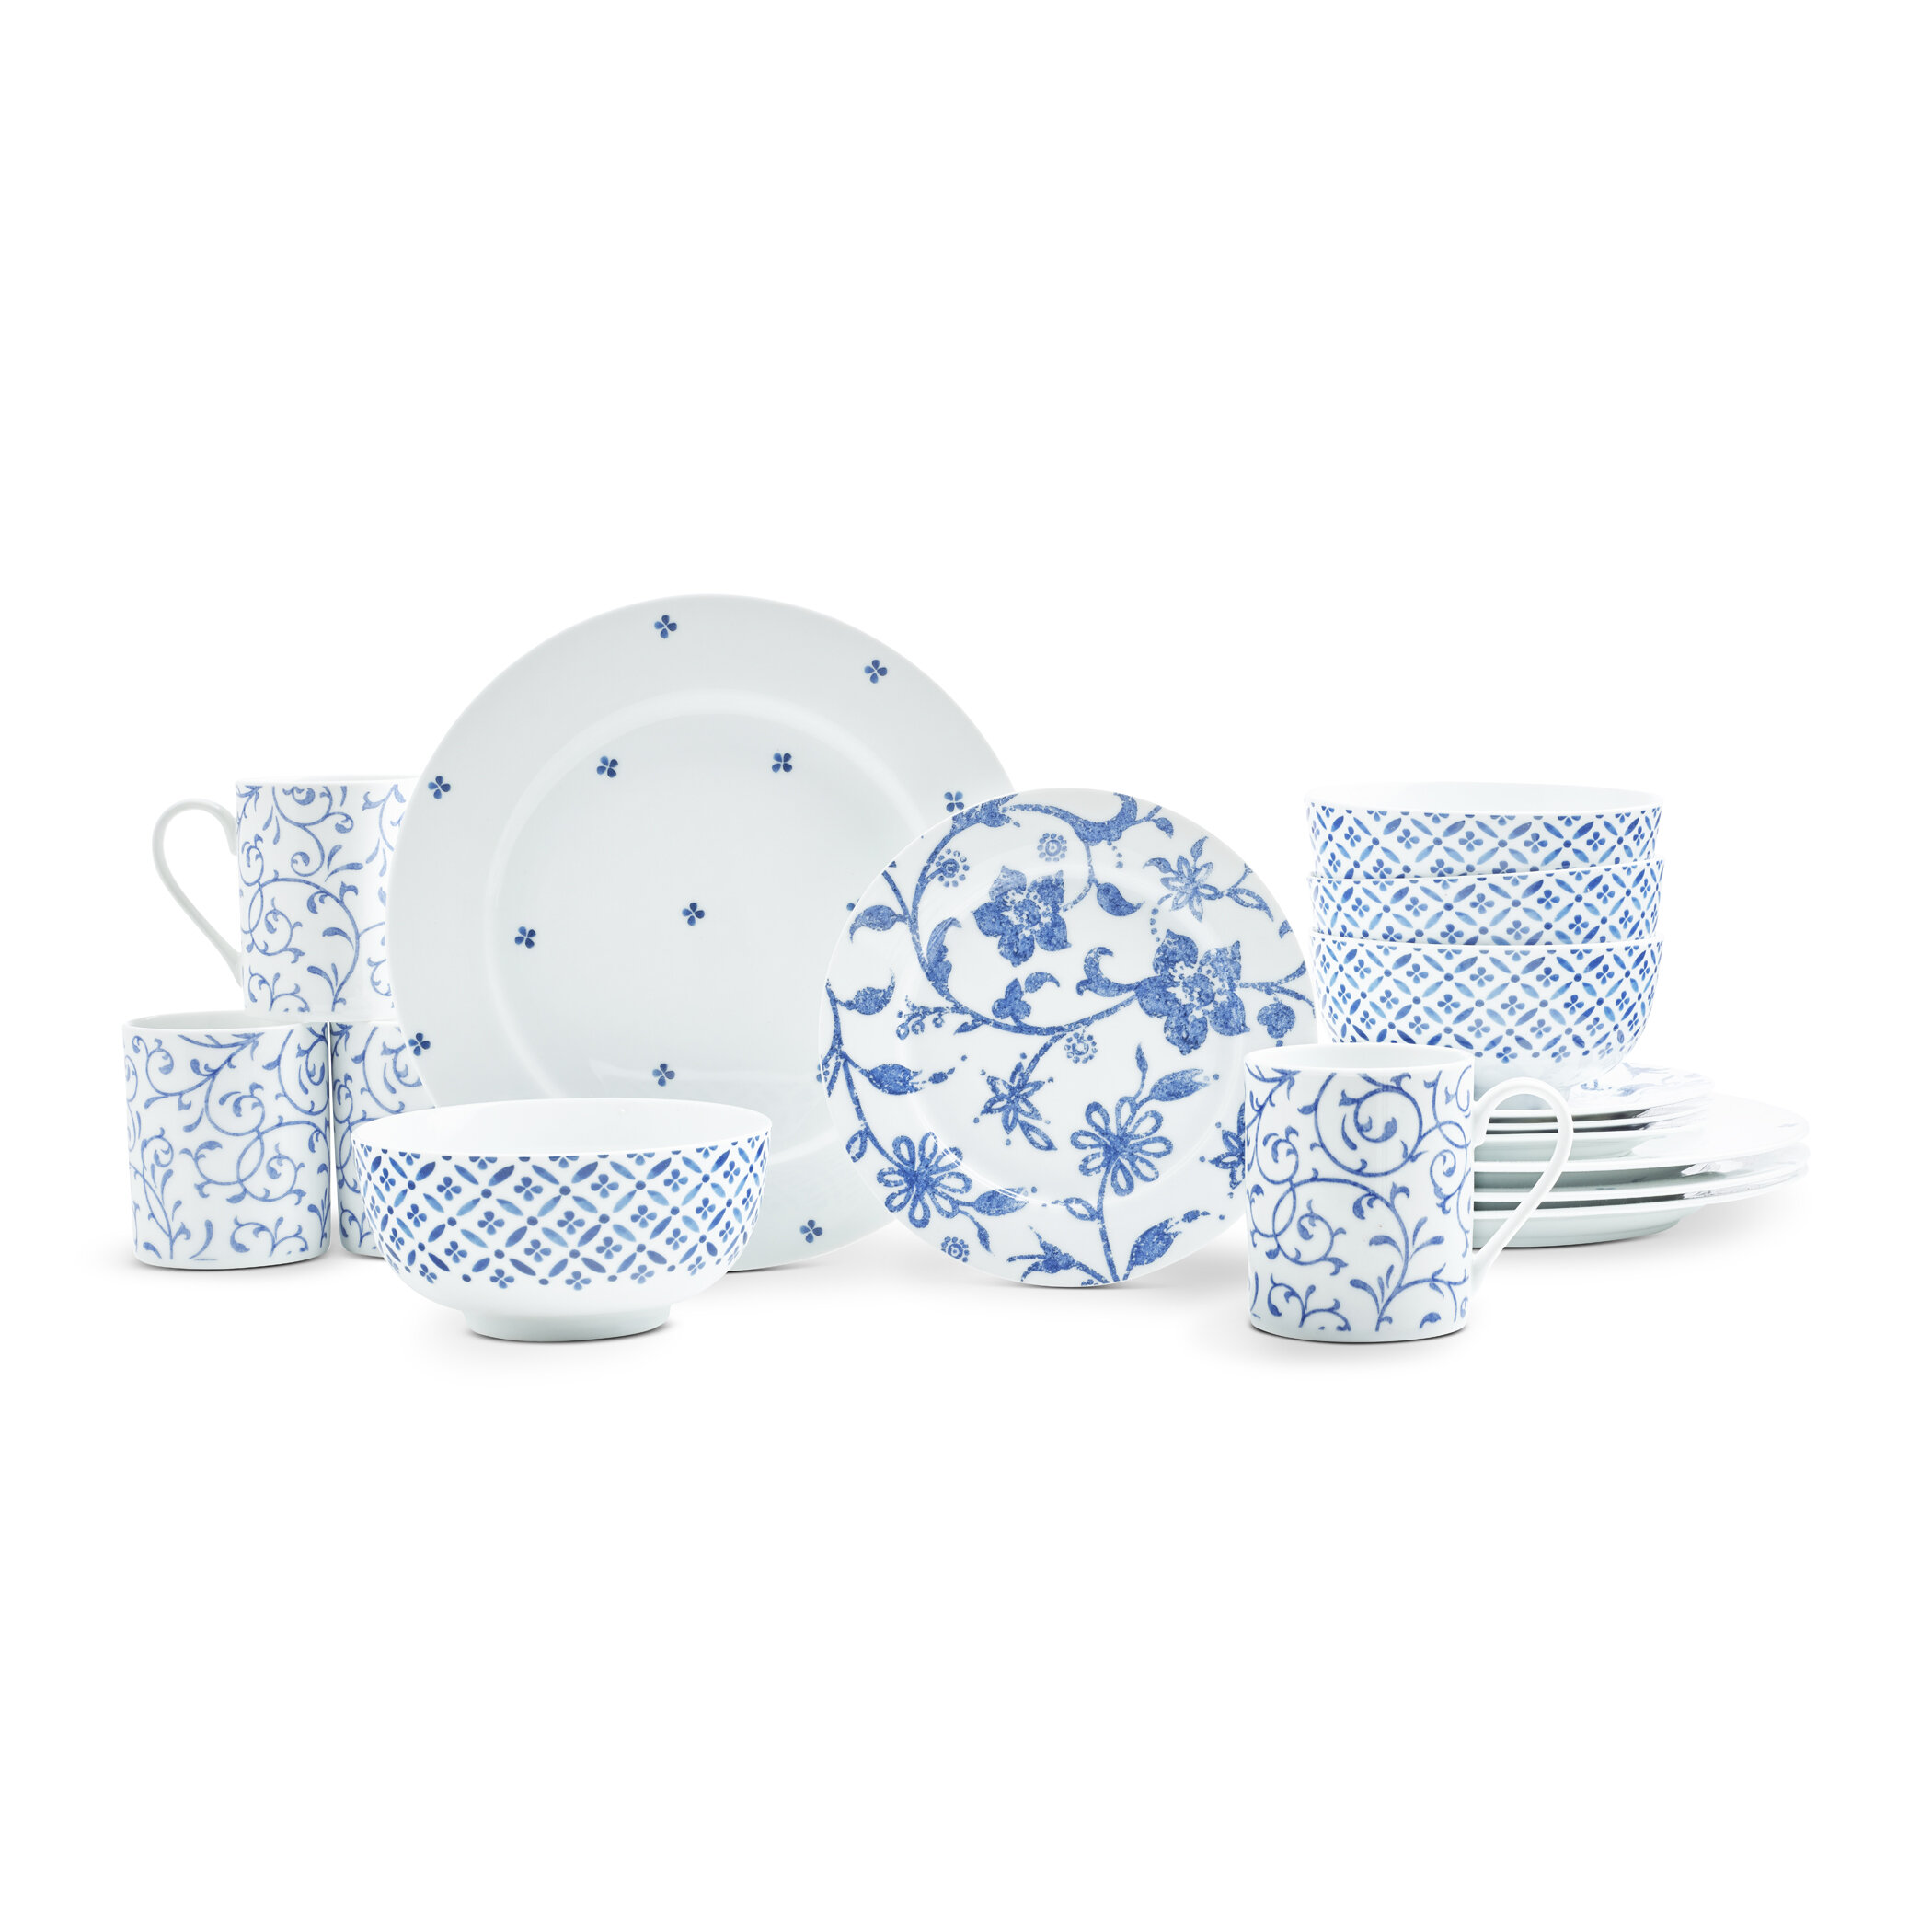 Soup Bowls Dessert Plates 16-Piece Porcelain Dinnerware Set Service for 4 Spiral Pattern and Fluted, 16 Pieces Kitchen Dinner Set with Dinner Plates Mugs